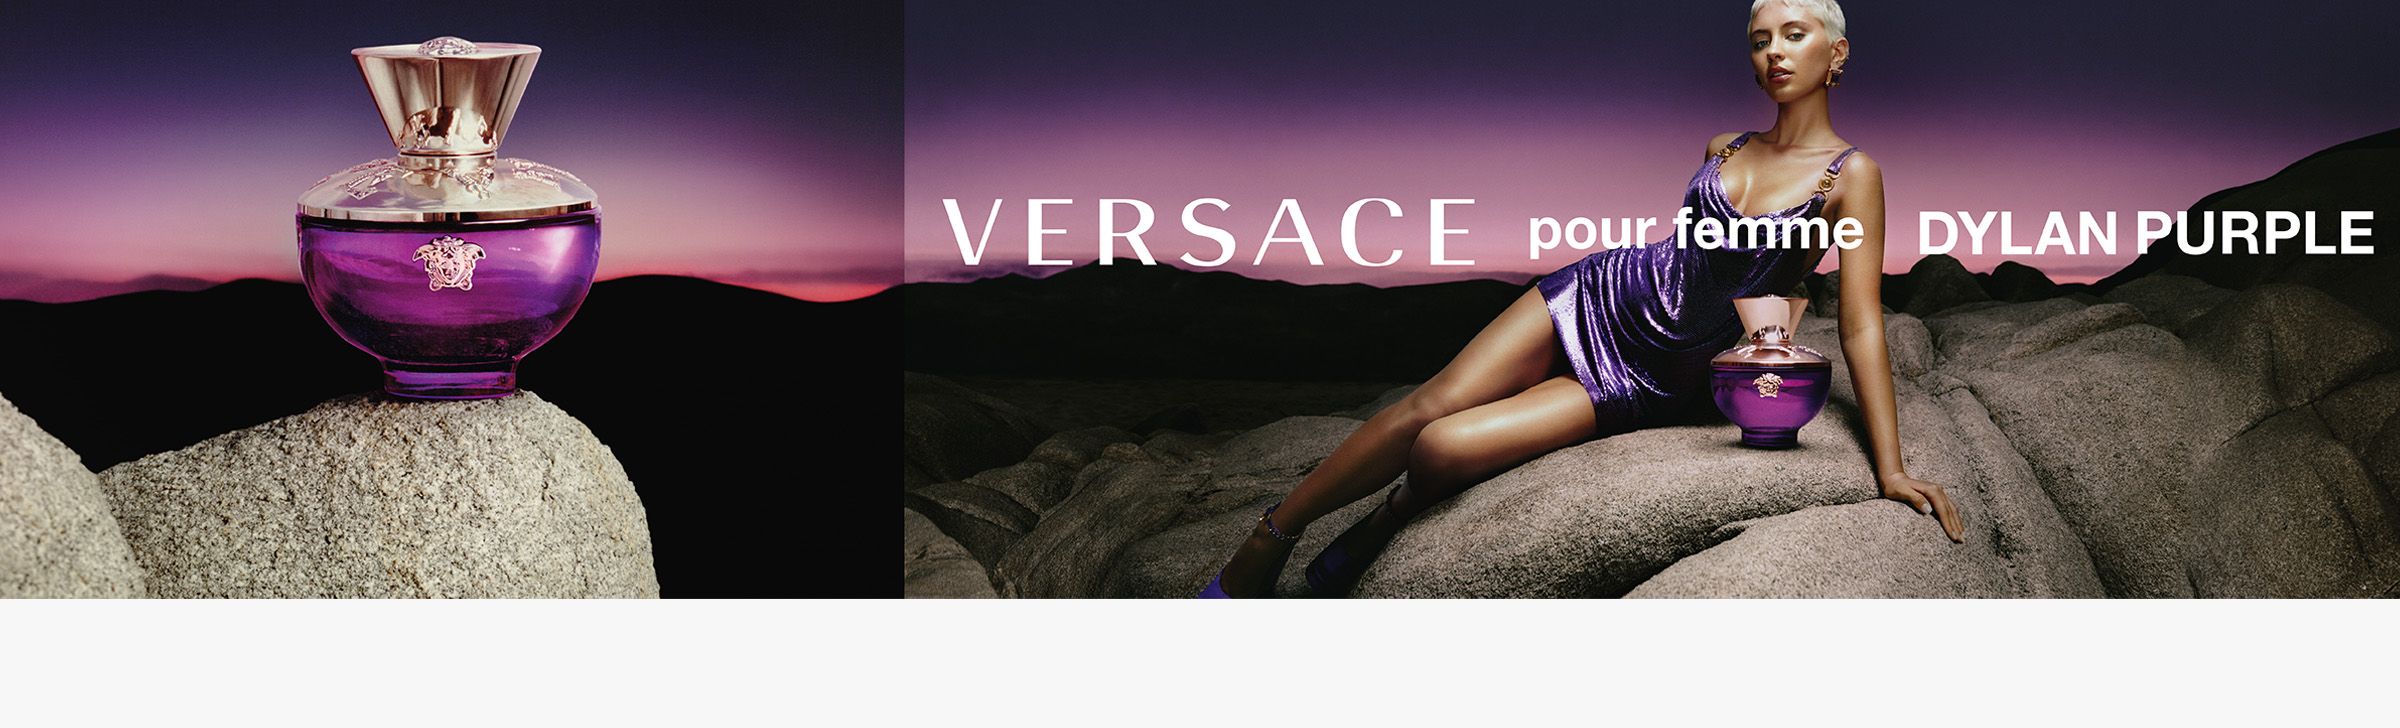 Woman laying on set with Versace text